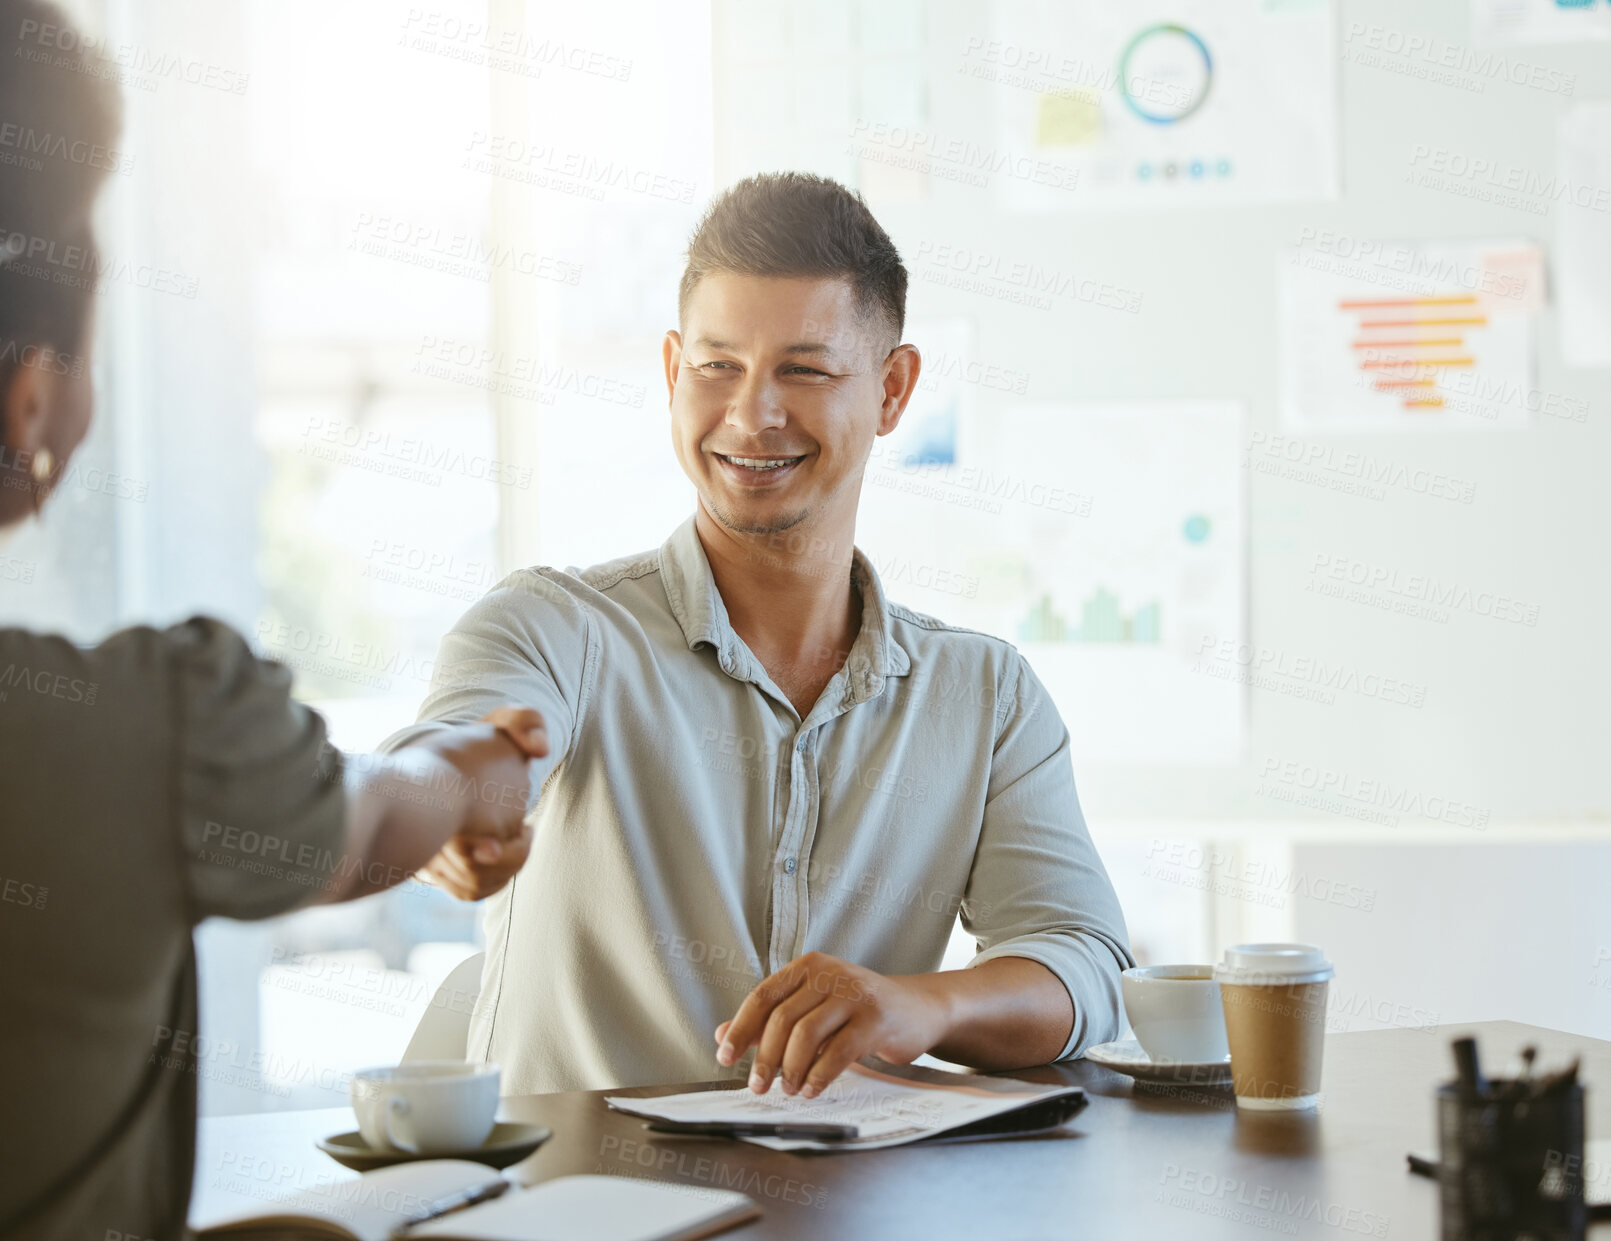 Buy stock photo Two businesspeople shaking hands while in an office together at work. Business professionals greeting and making deals with each other. Hispanic boss hiring an employee in an interview